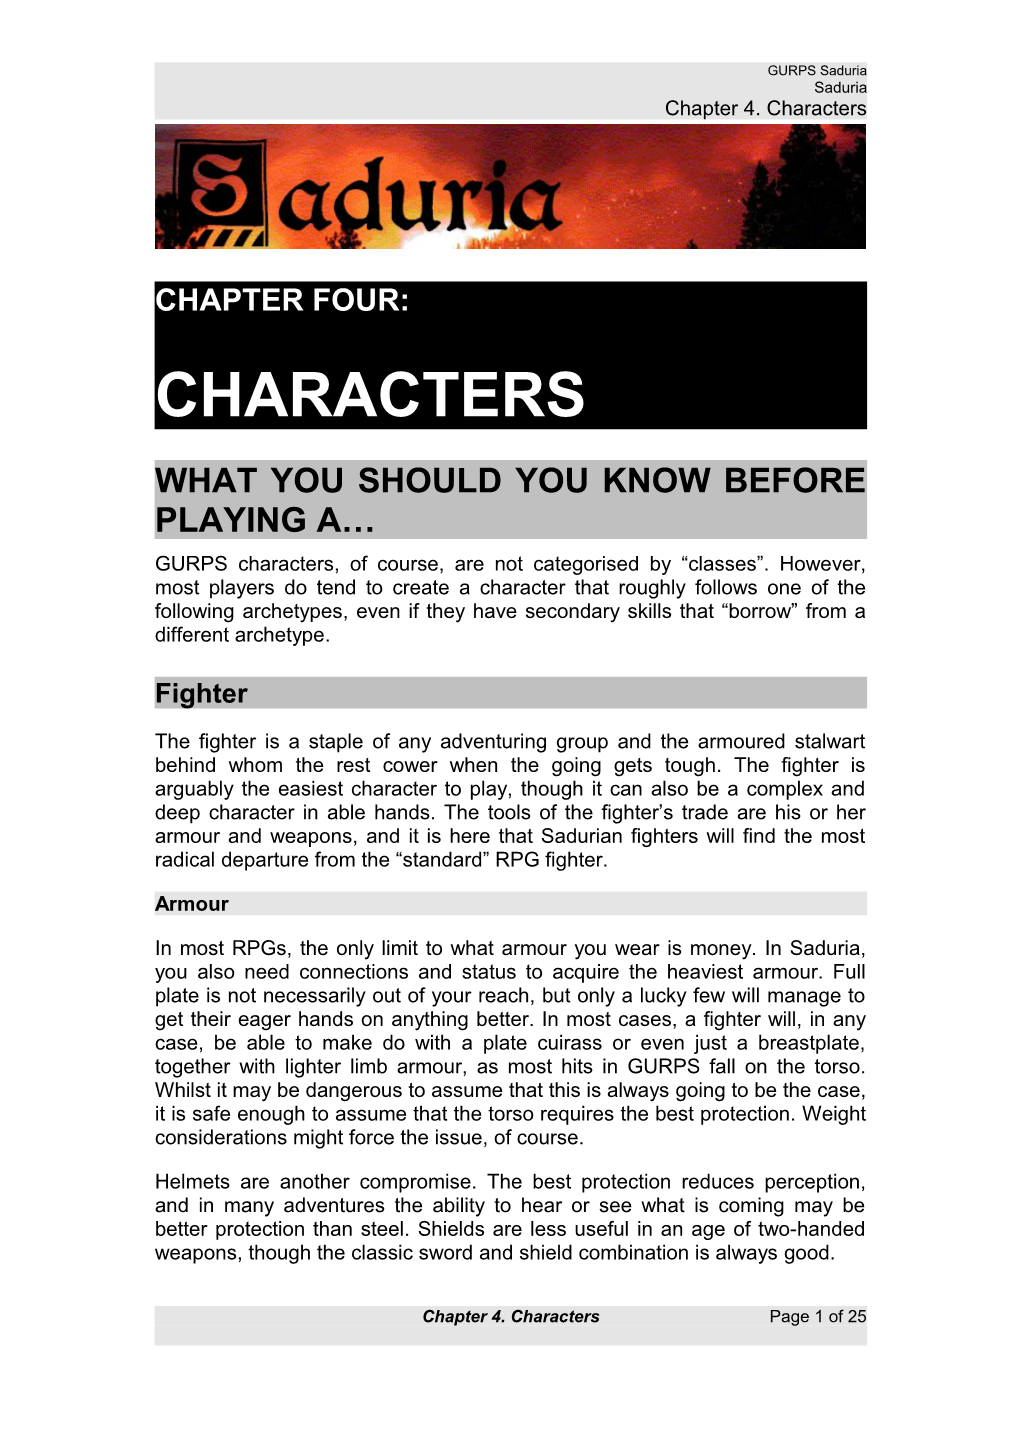 What You Should You Know Before Playing A